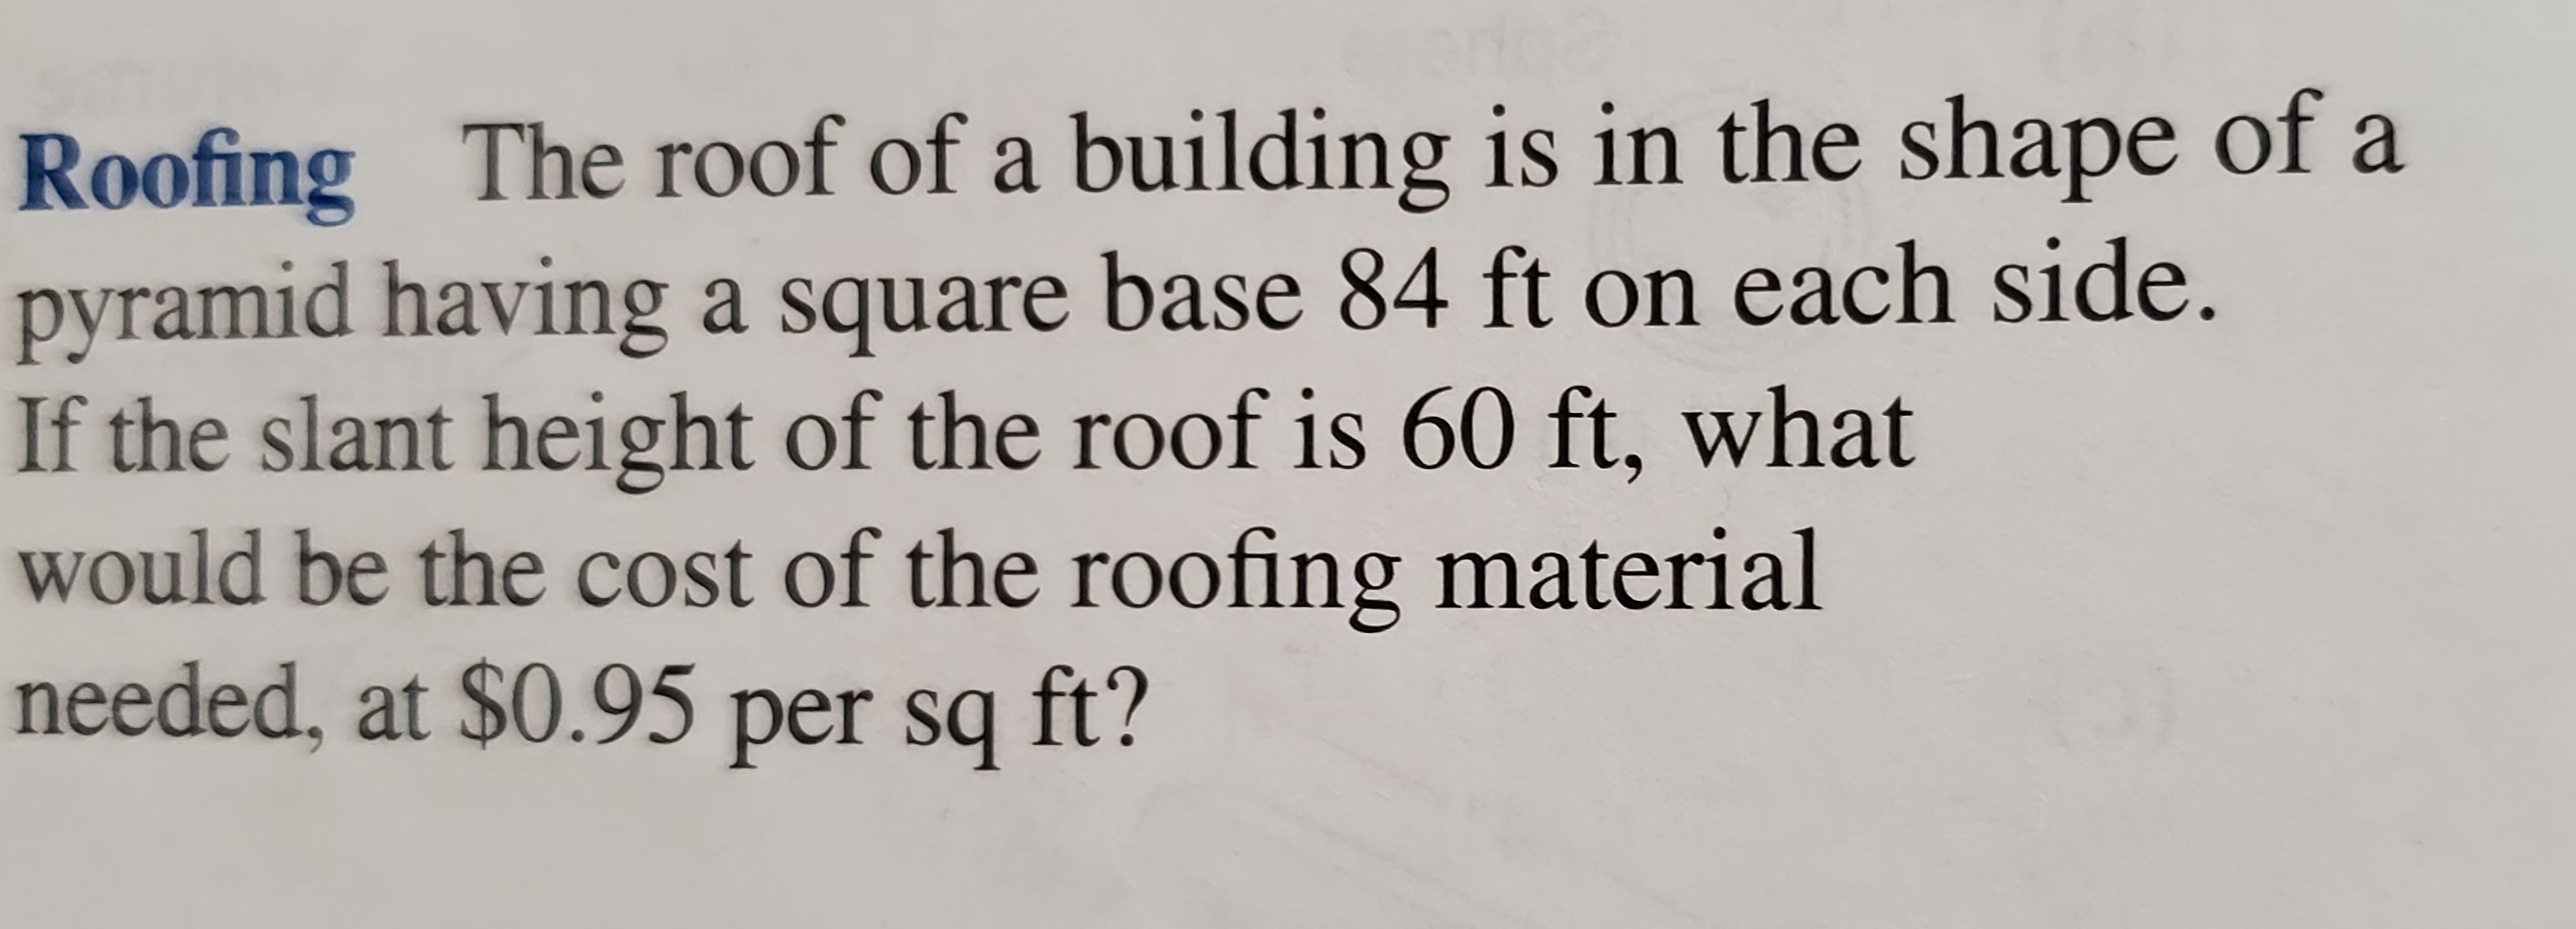 Roofing The roof of a building is in the shape of a
pyramid having a square base 84 ft on each side.
If the slant height of the roof is 60 ft, what
would be the cost of the roofing material
needed, at $0.95 per sq ft?
